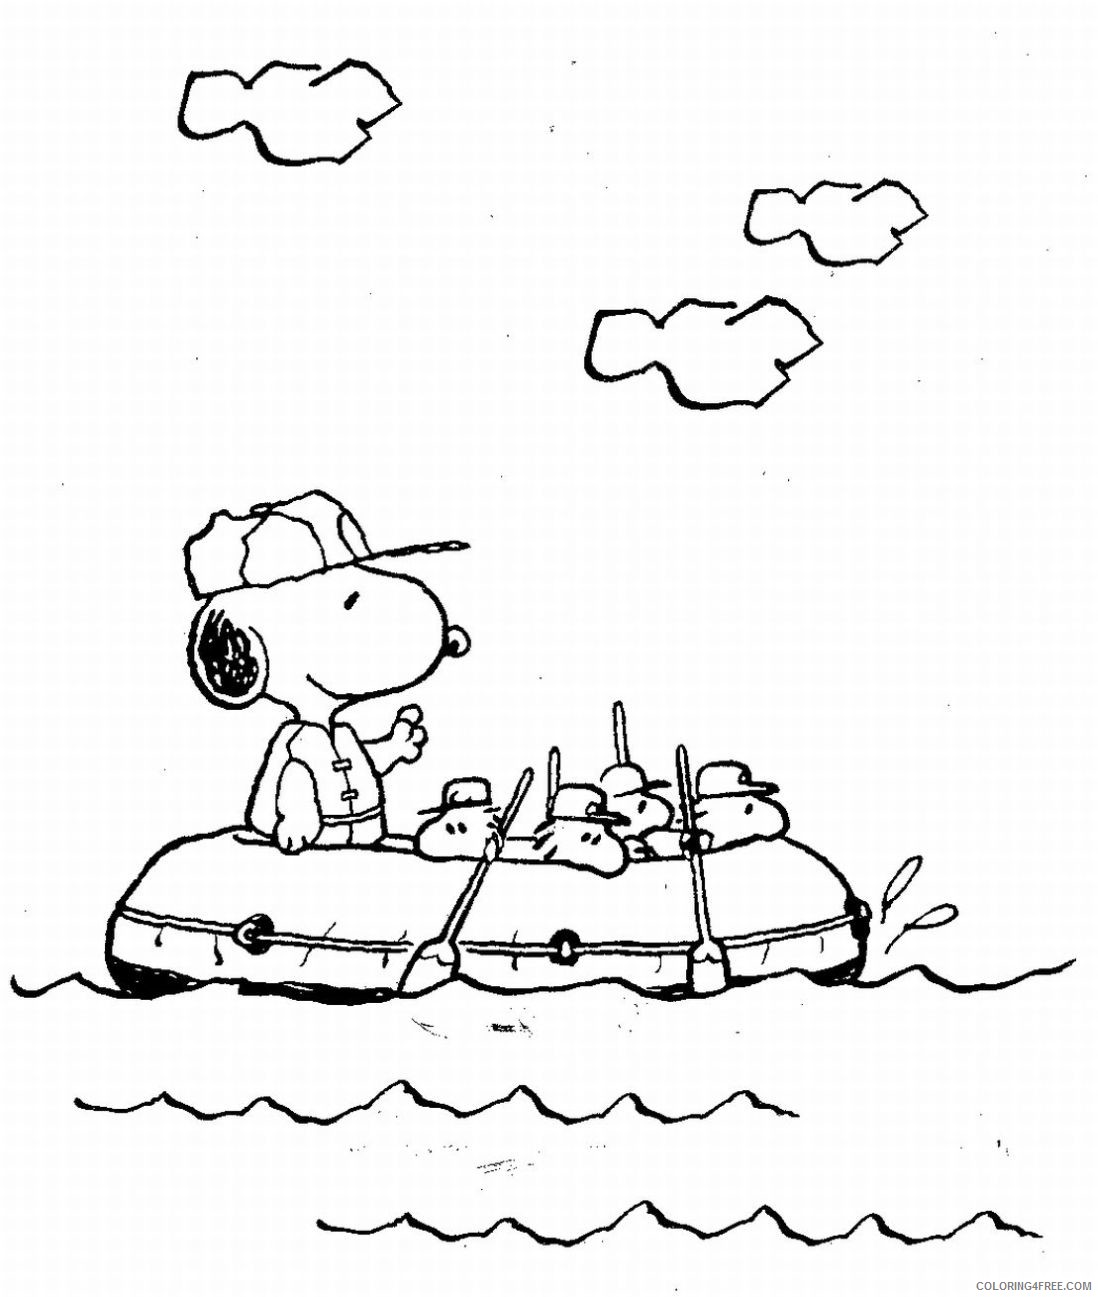 Snoopy Coloring Pages Cartoons Snoopy Dog Printable 2020 5690 Coloring4free